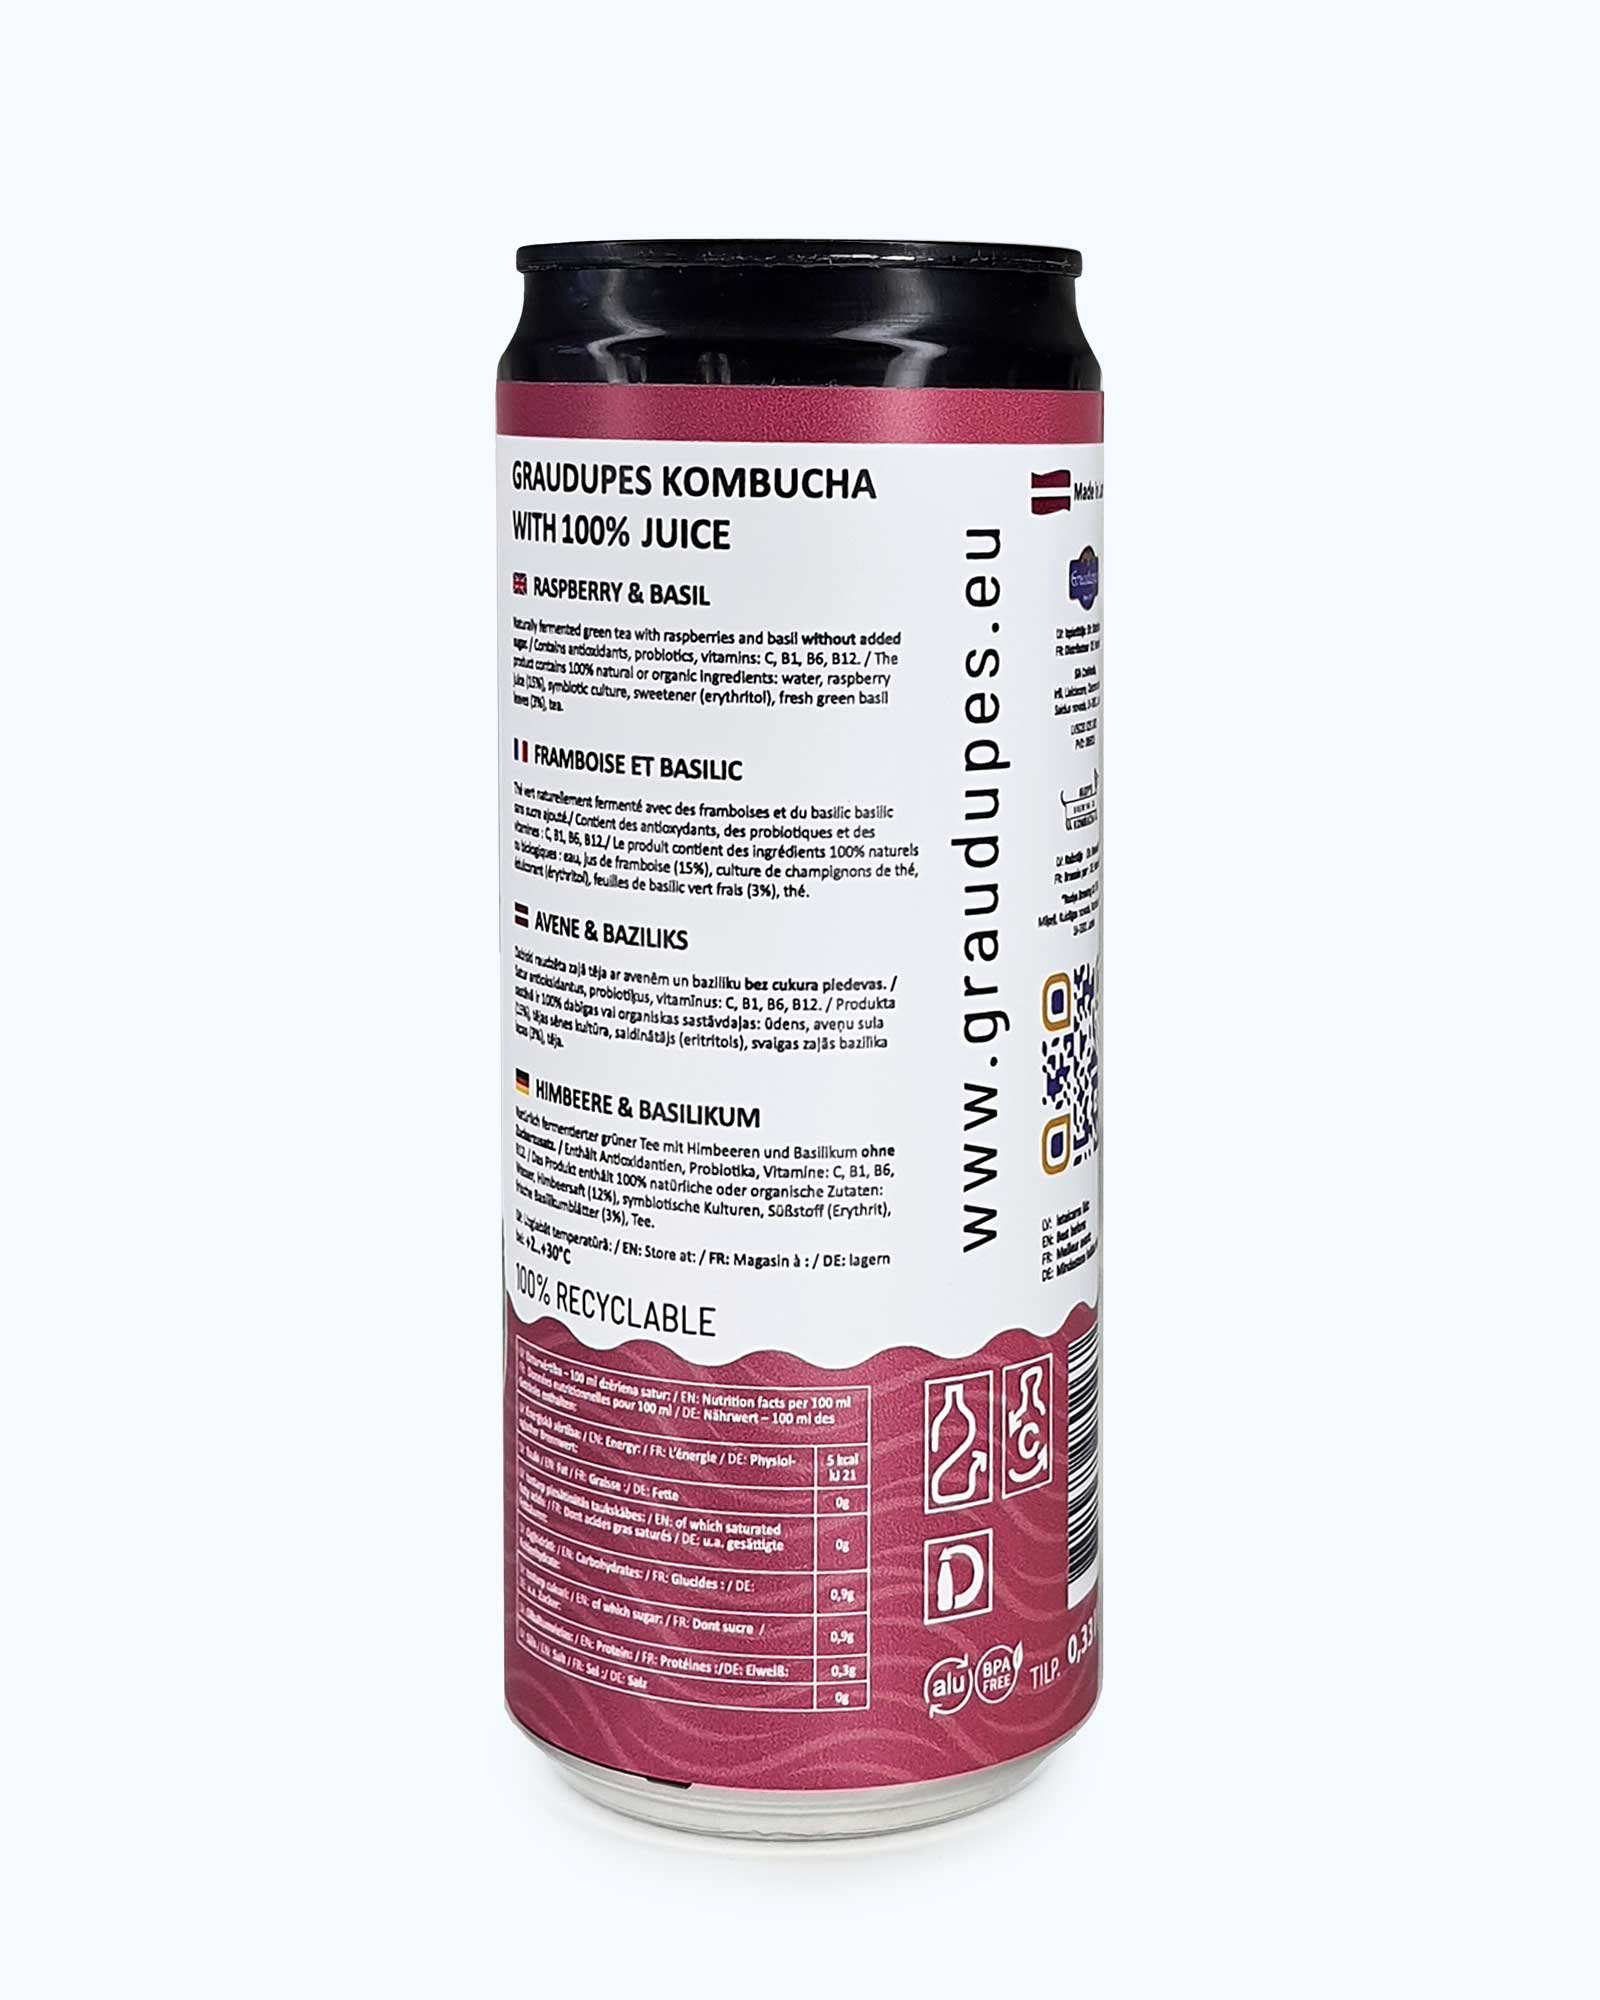 330ml can back side picture, Graudupes Raspberry & Basil Kombucha - Natural Fermented Tea Drink With Fruit Juice and Probiotics.